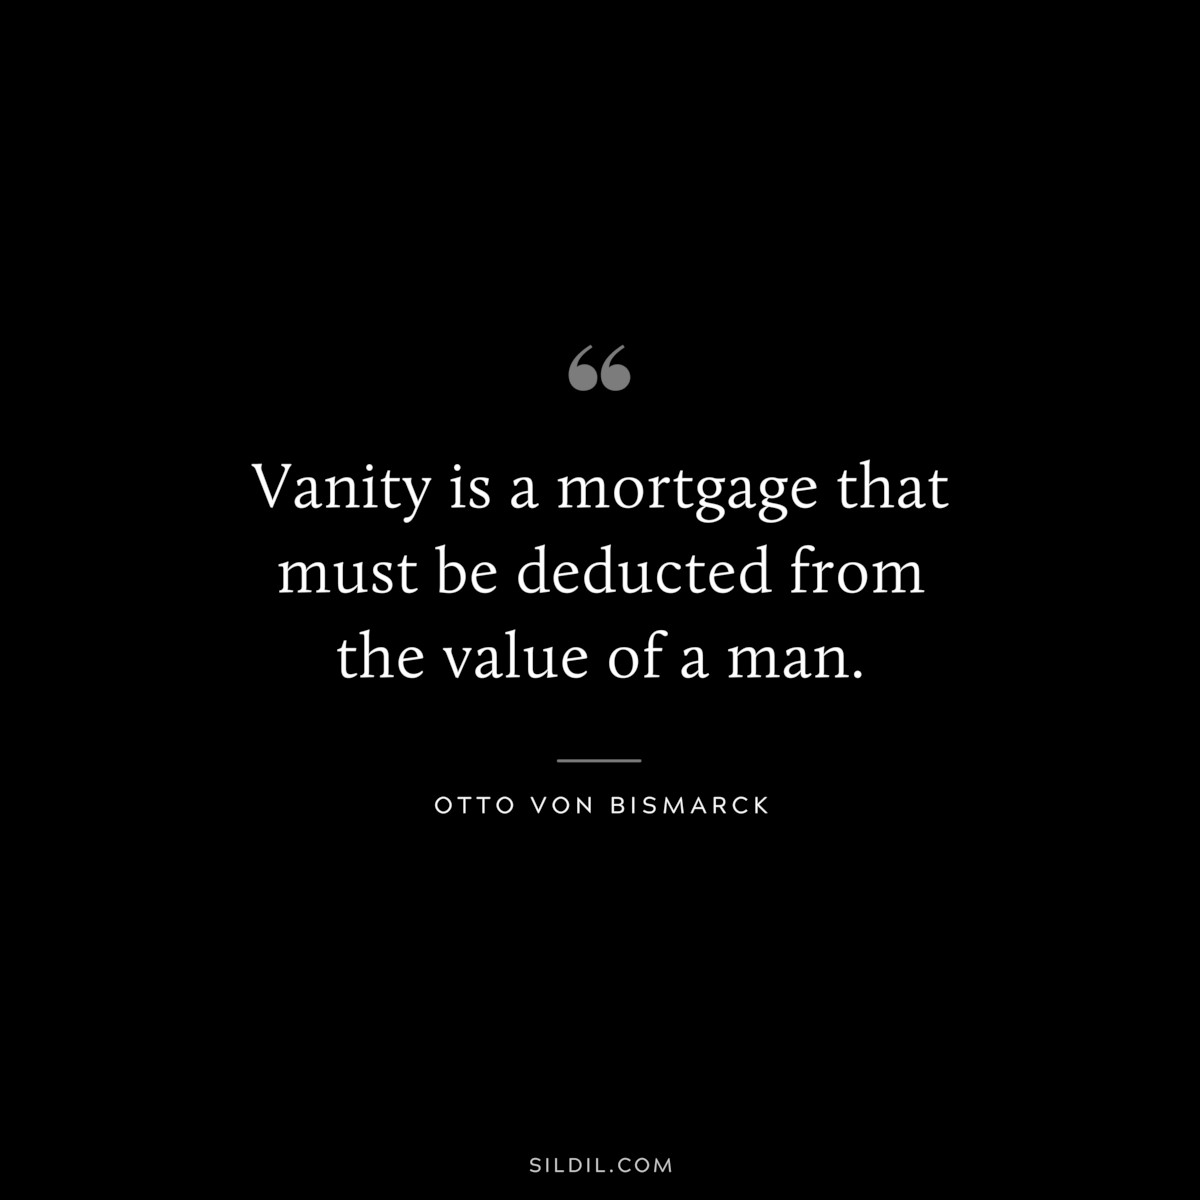 Vanity is a mortgage that must be deducted from the value of a man. ― Otto von Bismarck